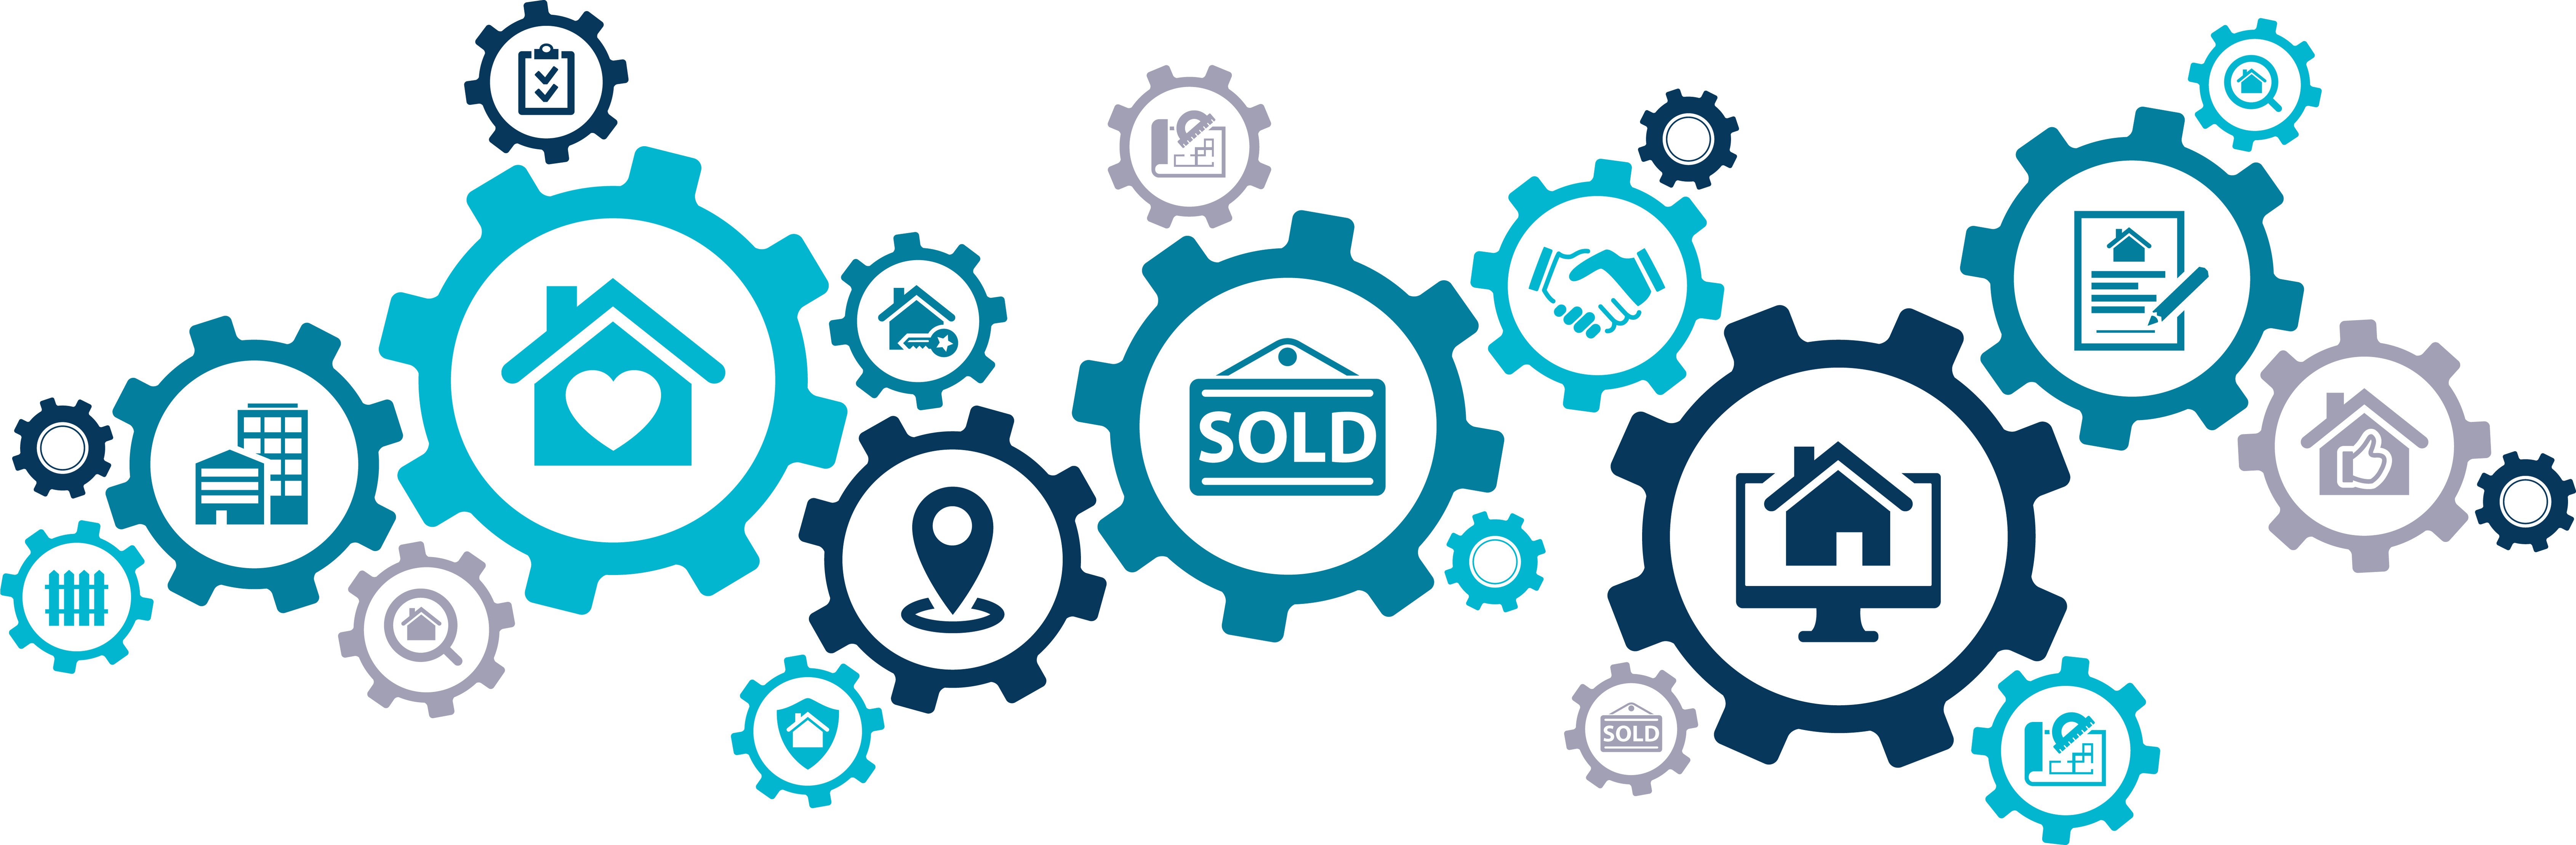 Looking for the competitive edge for your real estate agency? It starts in the Cloud.